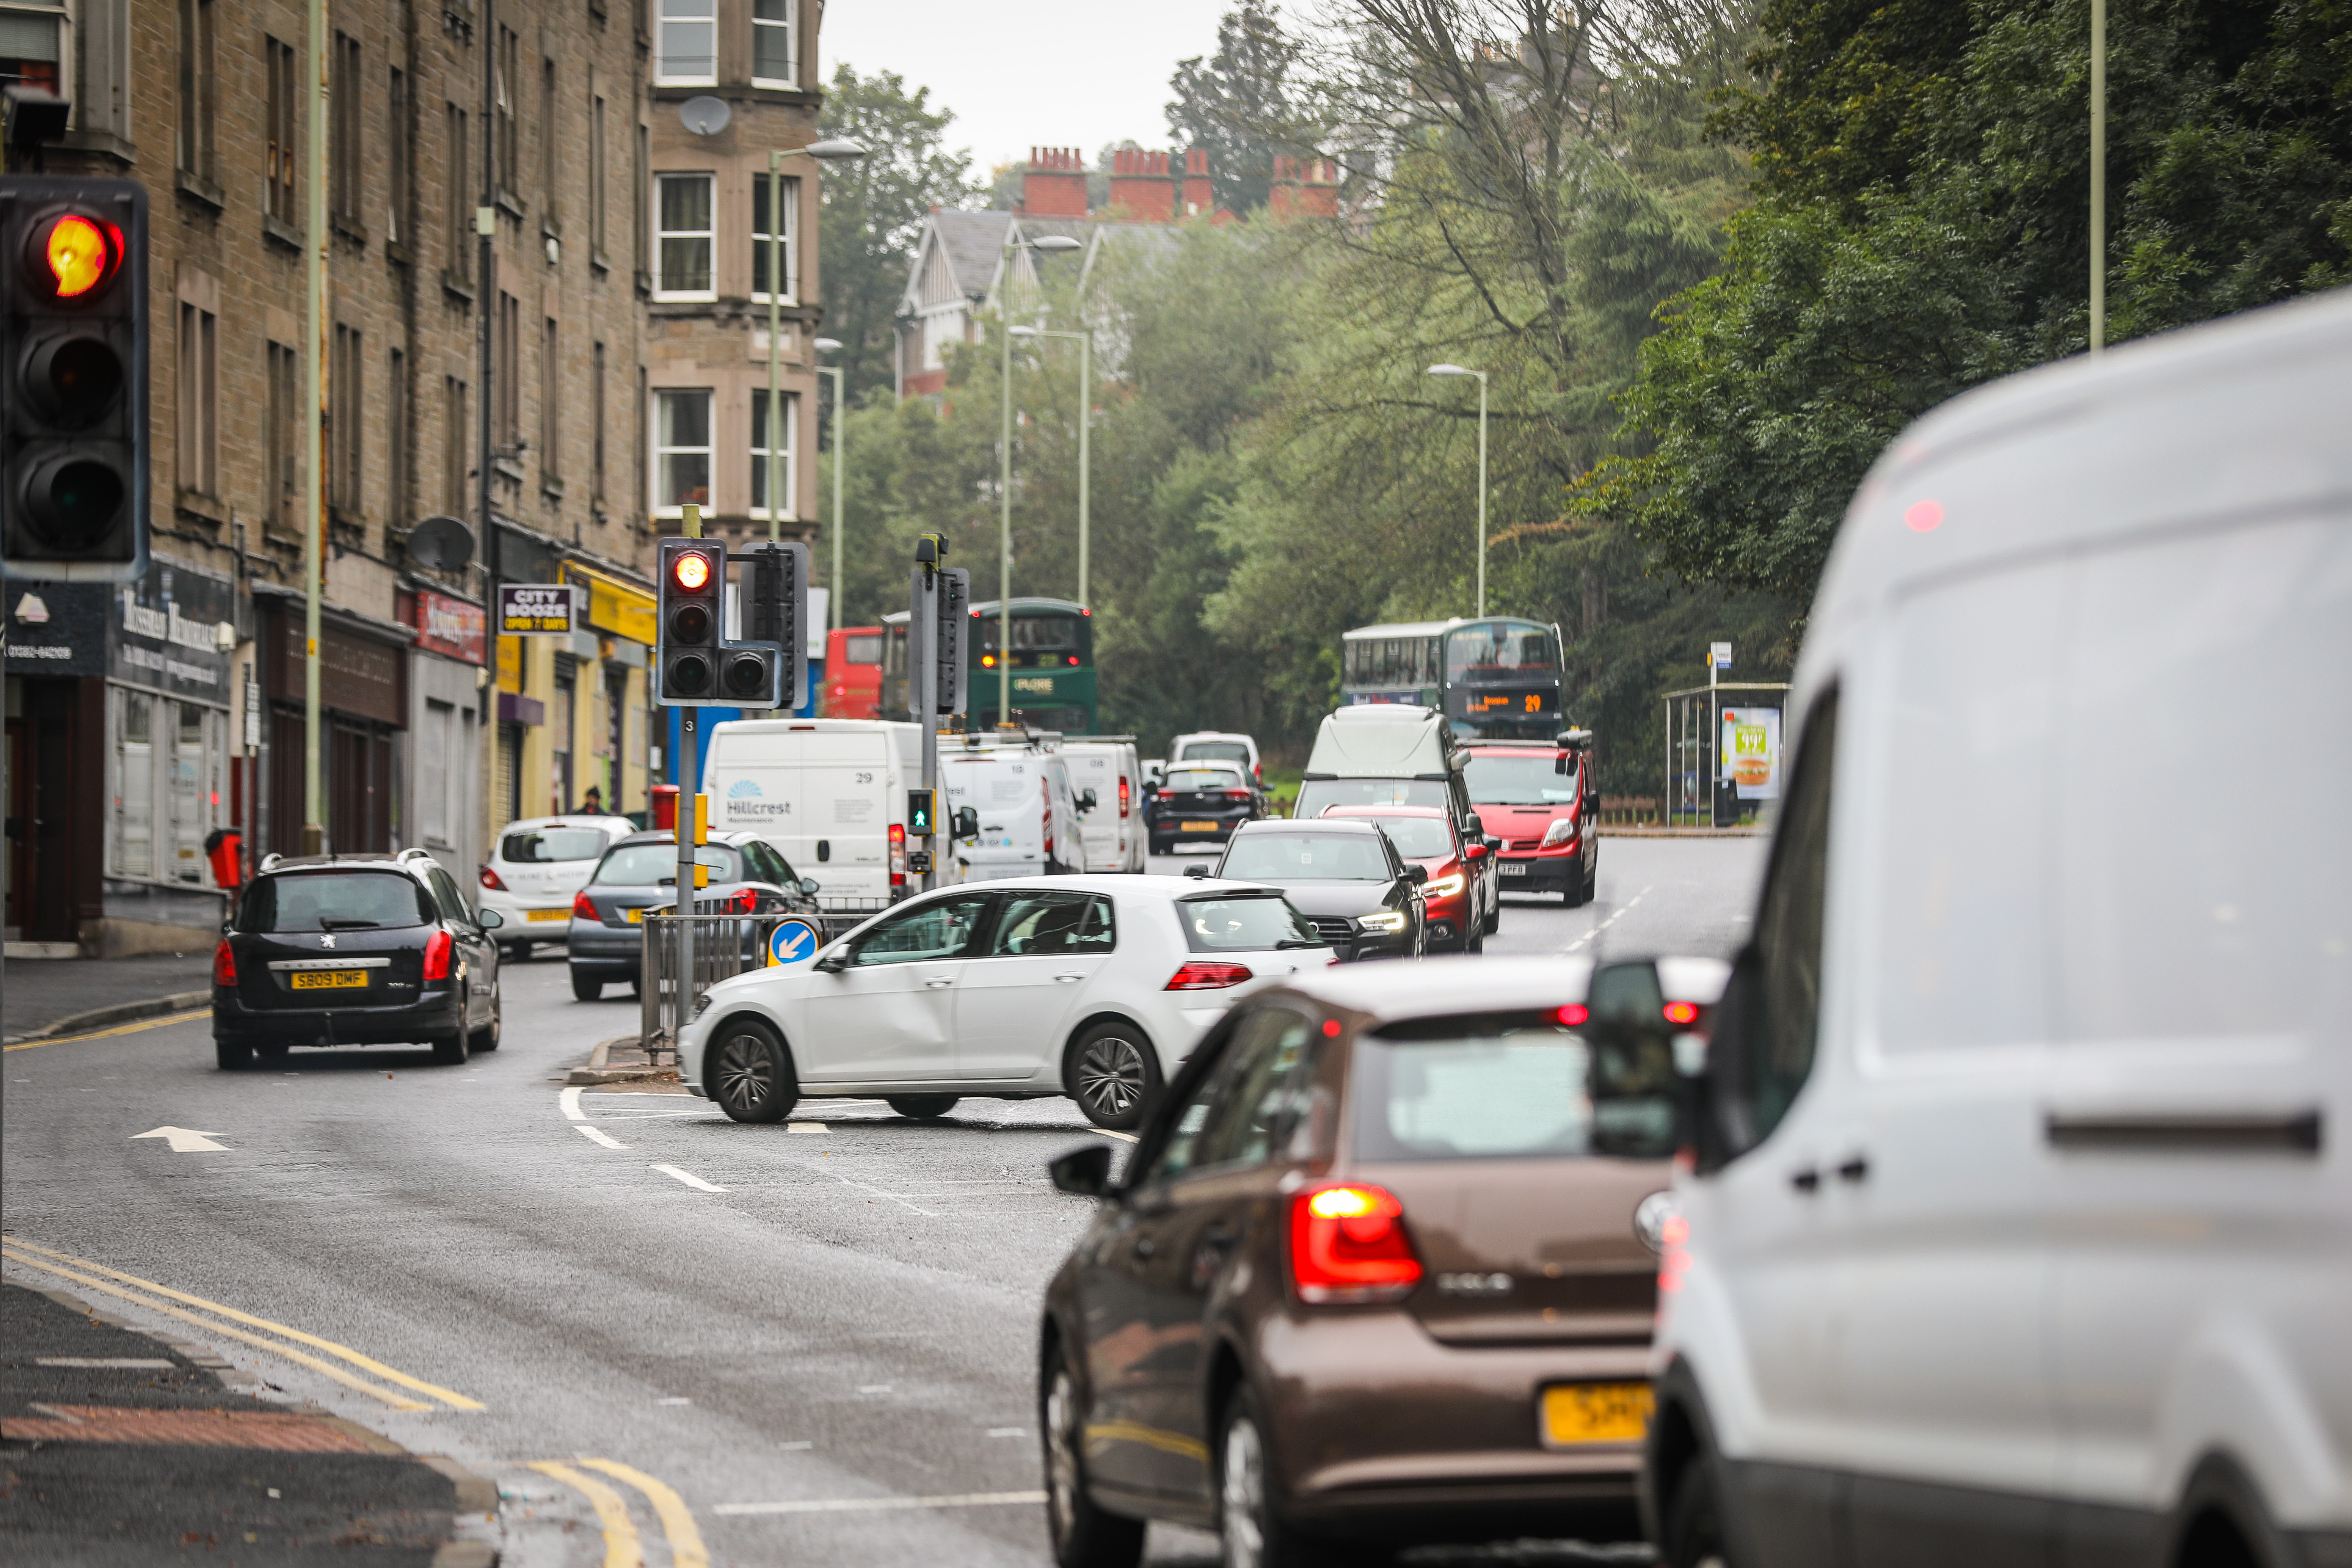 Lochee Road is one of the most polluted streets in Scotland.